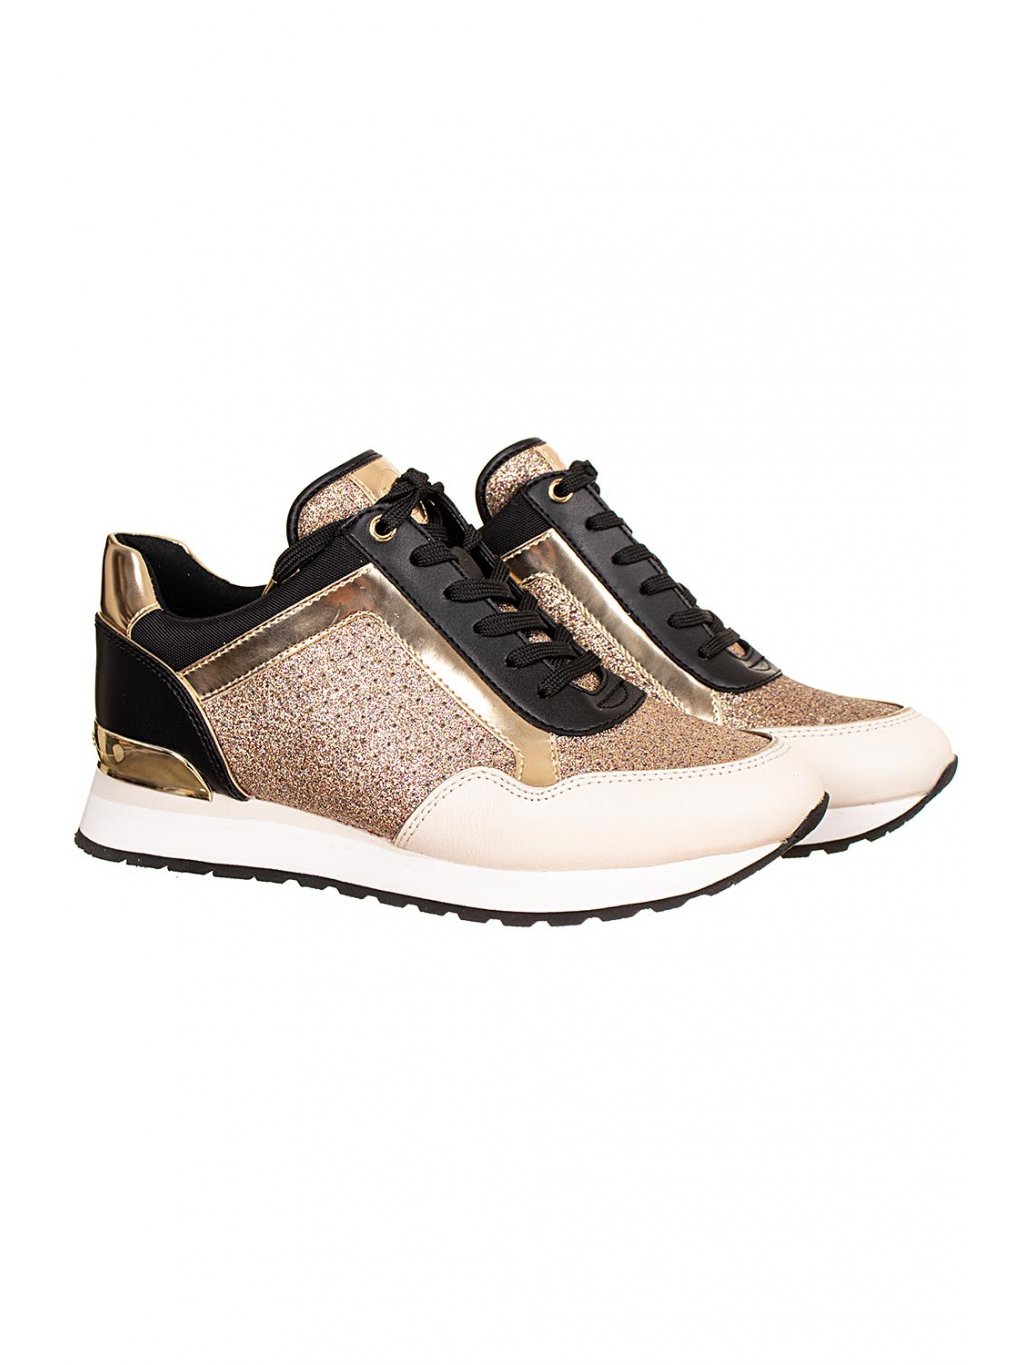 Michael Kors Trainers  Ima Tinsel  MK100015CW  Online shop for  sneakers shoes and boots